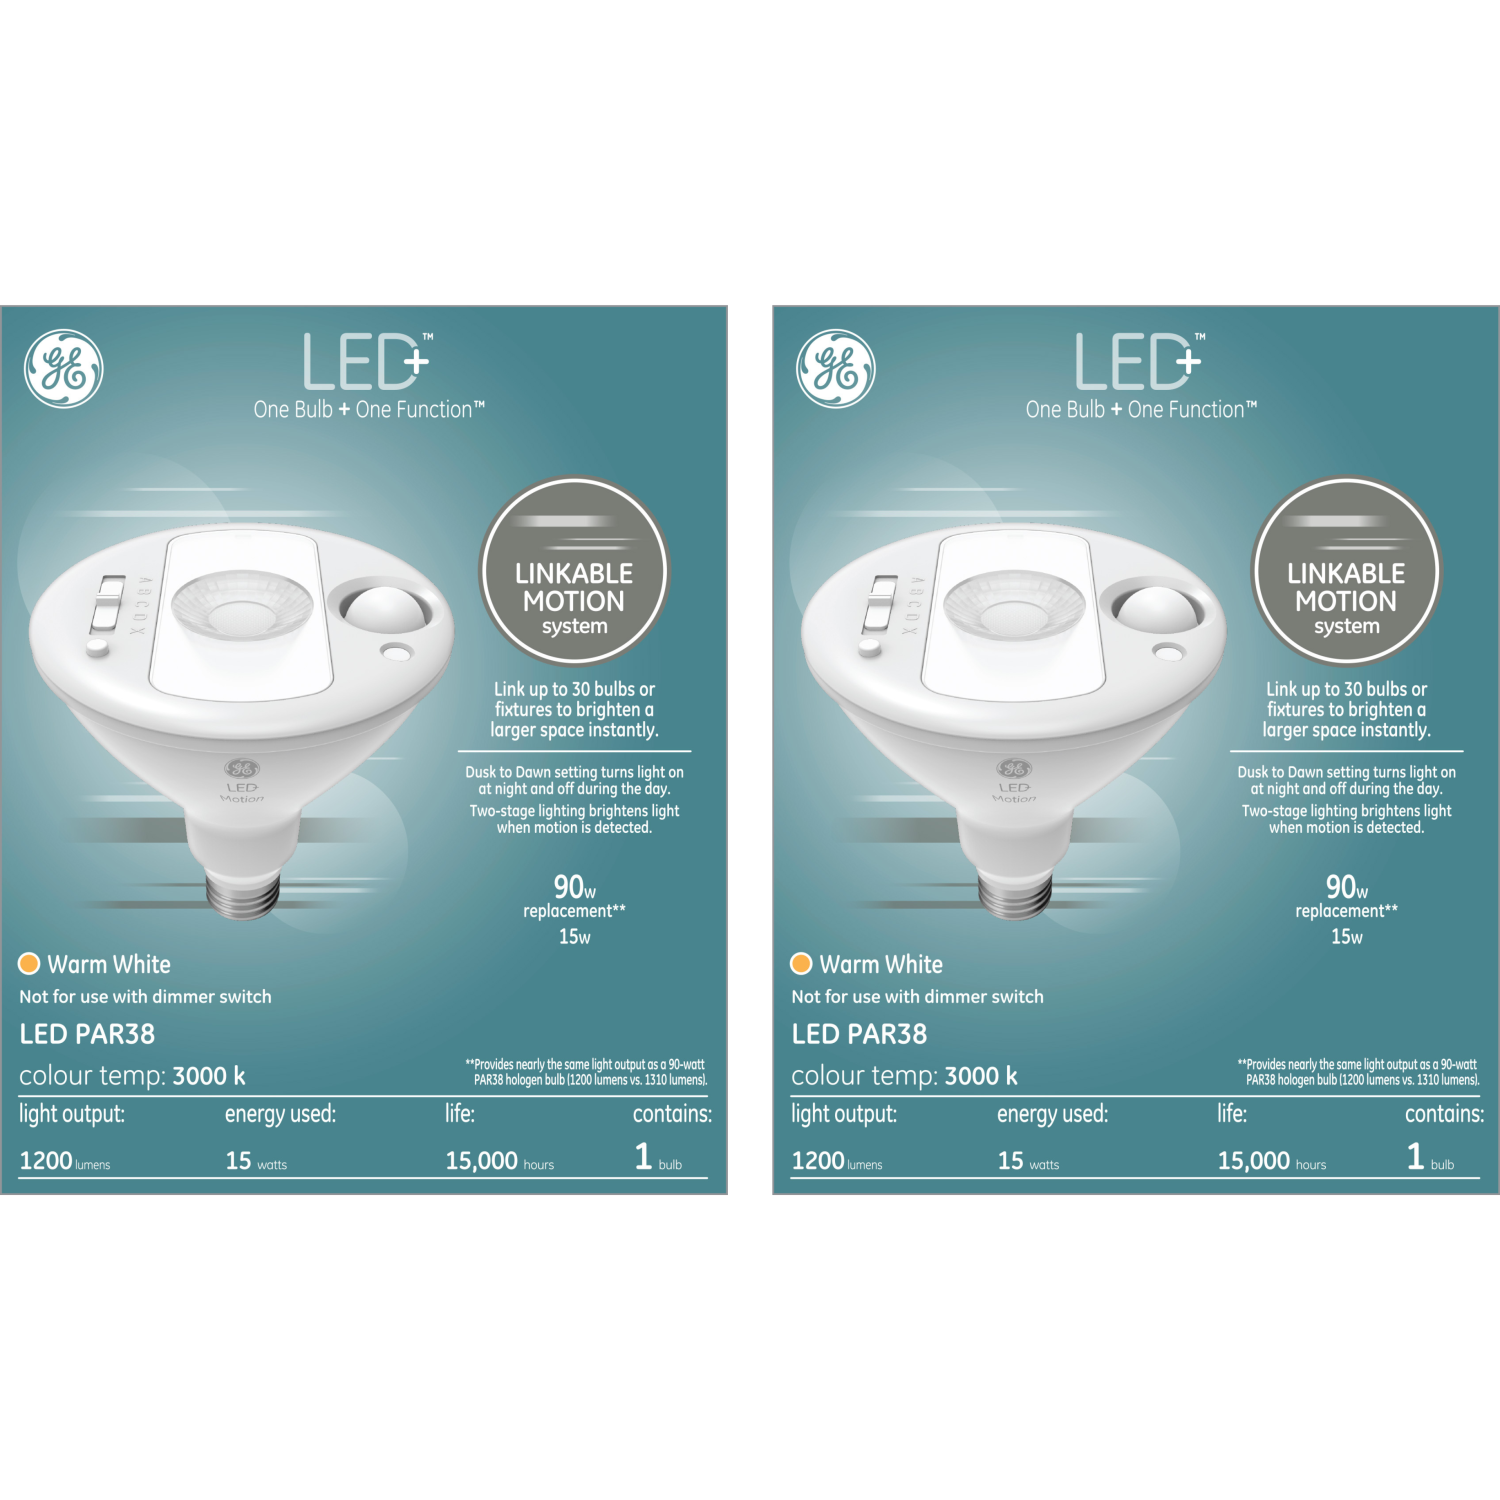 GE Lighting LED+ Linkable Motion Bright White 90W Replacement LED Outdoor Floodlight PAR38 Light Bulb (Includes TWO single packs)